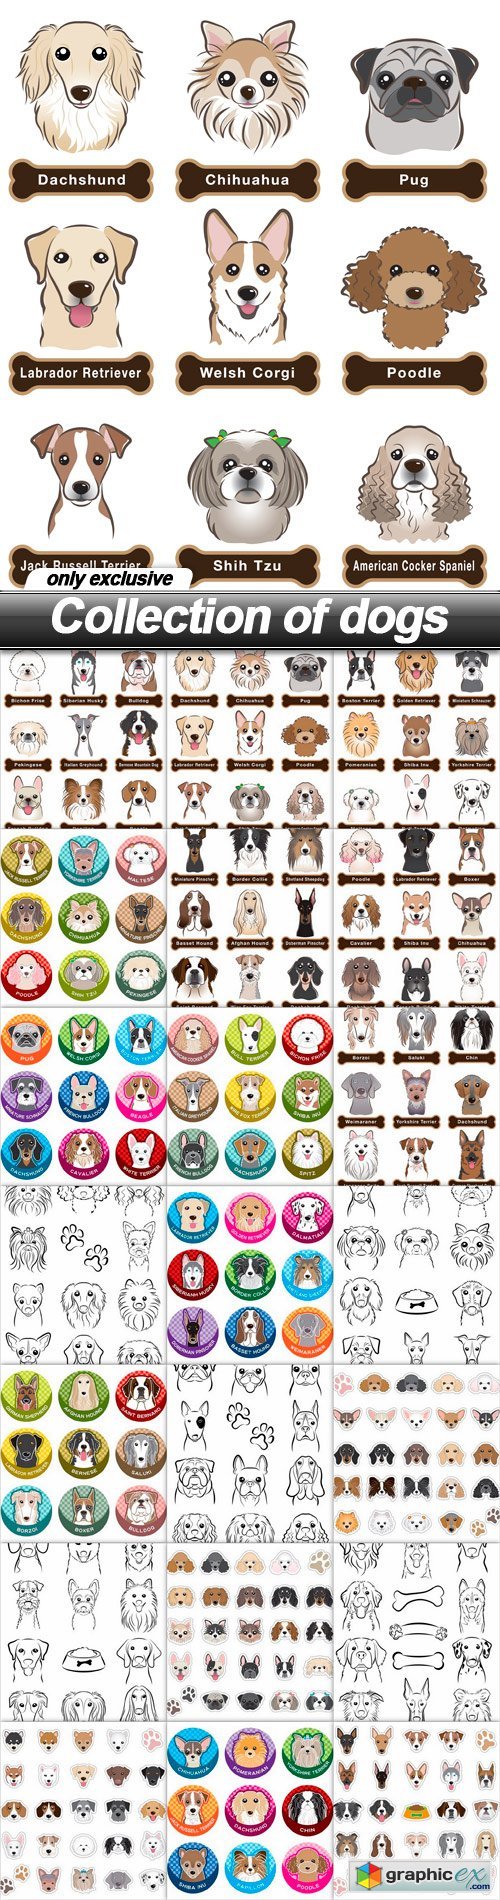 Collection of dogs - 21 EPS